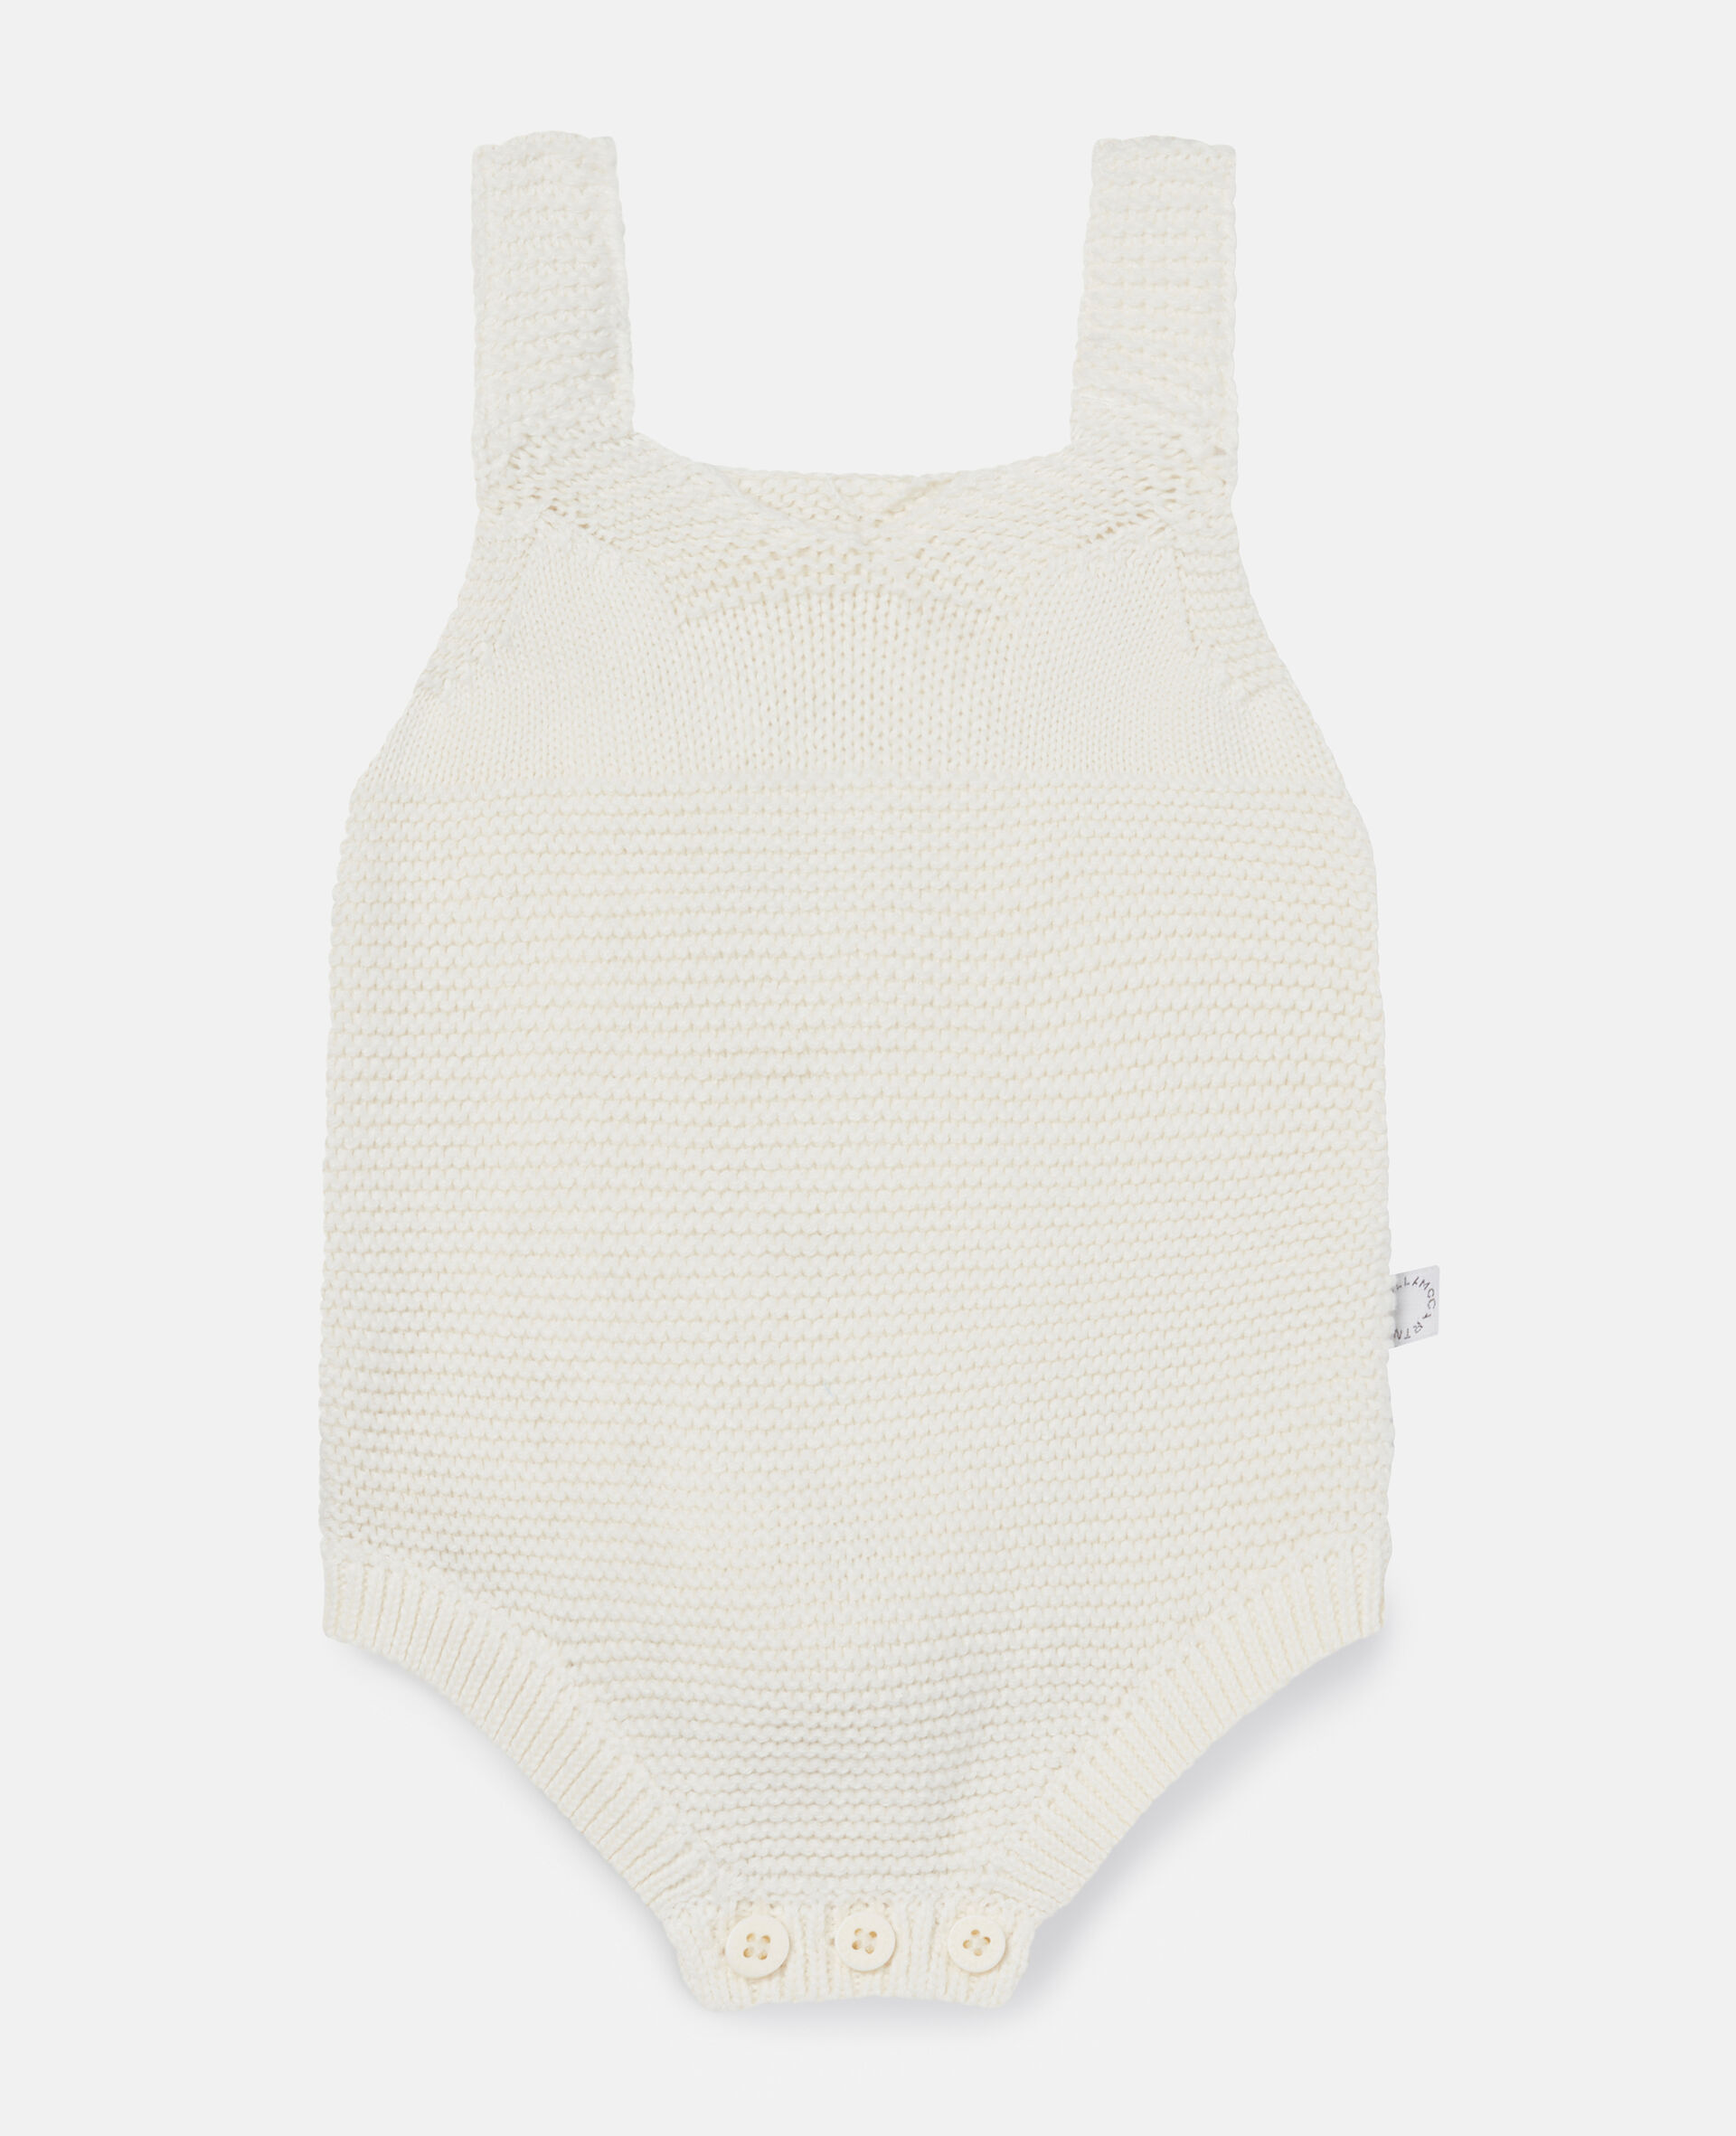 Knit Bunny Tail Bodysuit-White-large image number 0